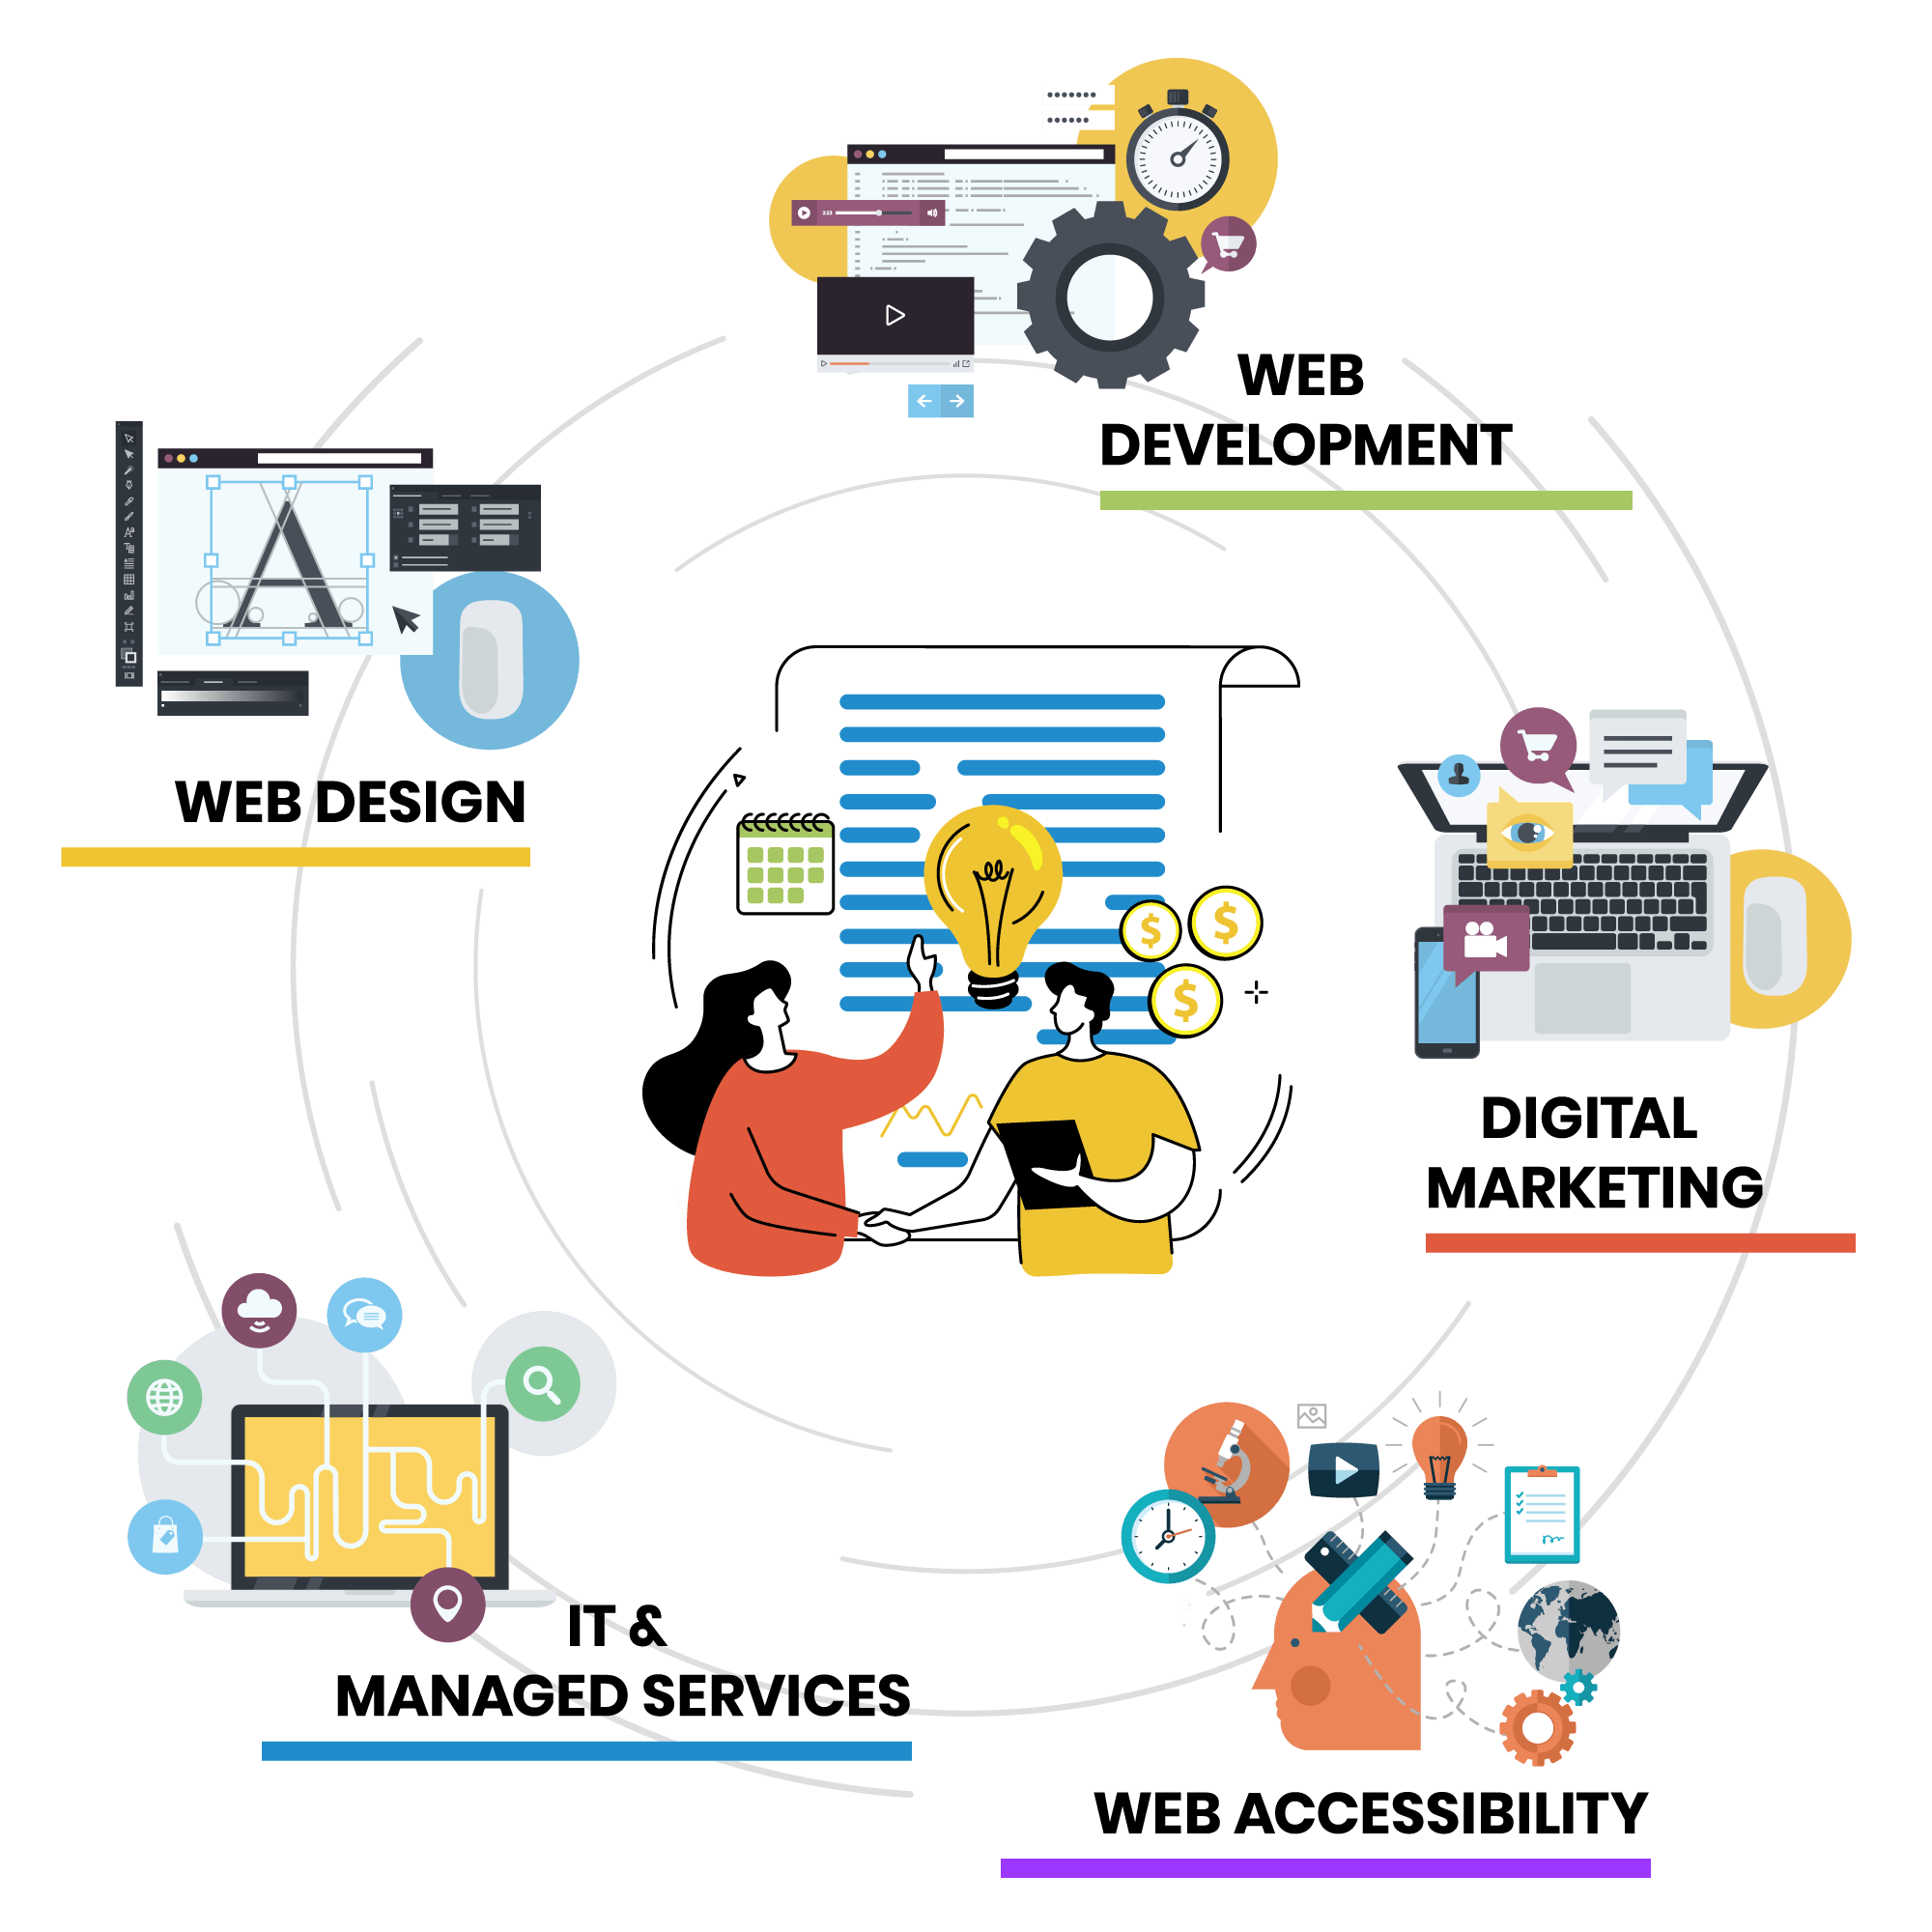 graphic showing icons for web development, web design, digital marketing, web accessibility, IT, and managed services around a project icon